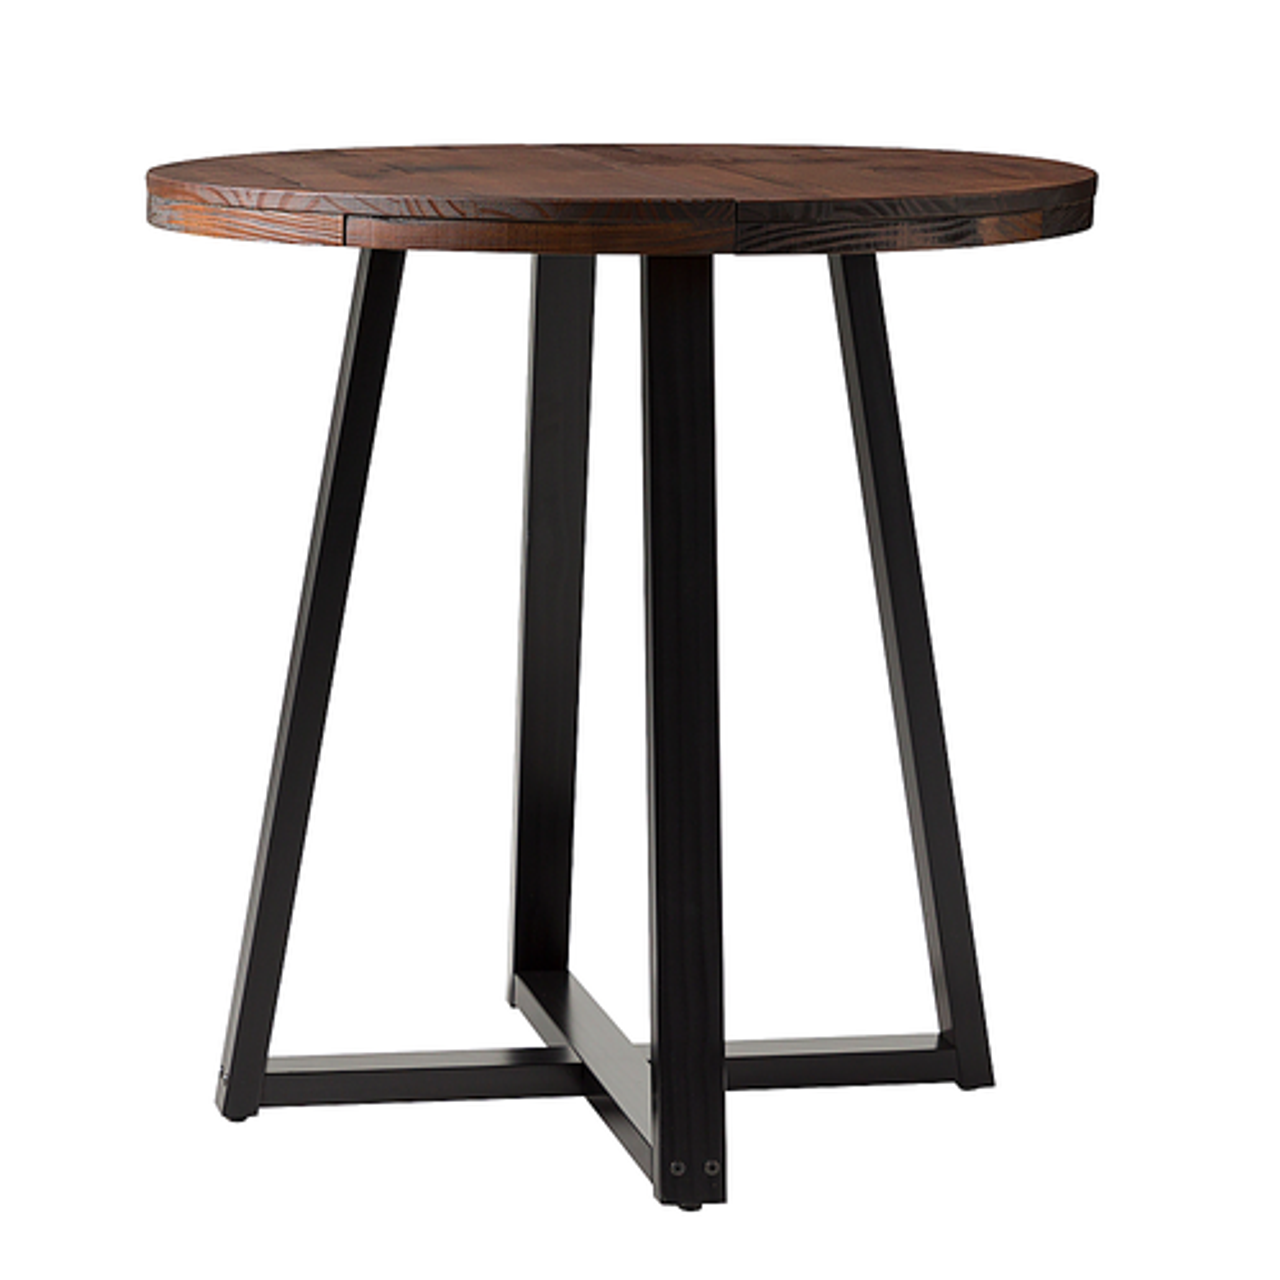 Walker Edison - Rustic Distressed Counter-Height Solid Wood Dining Stool - Mahogany